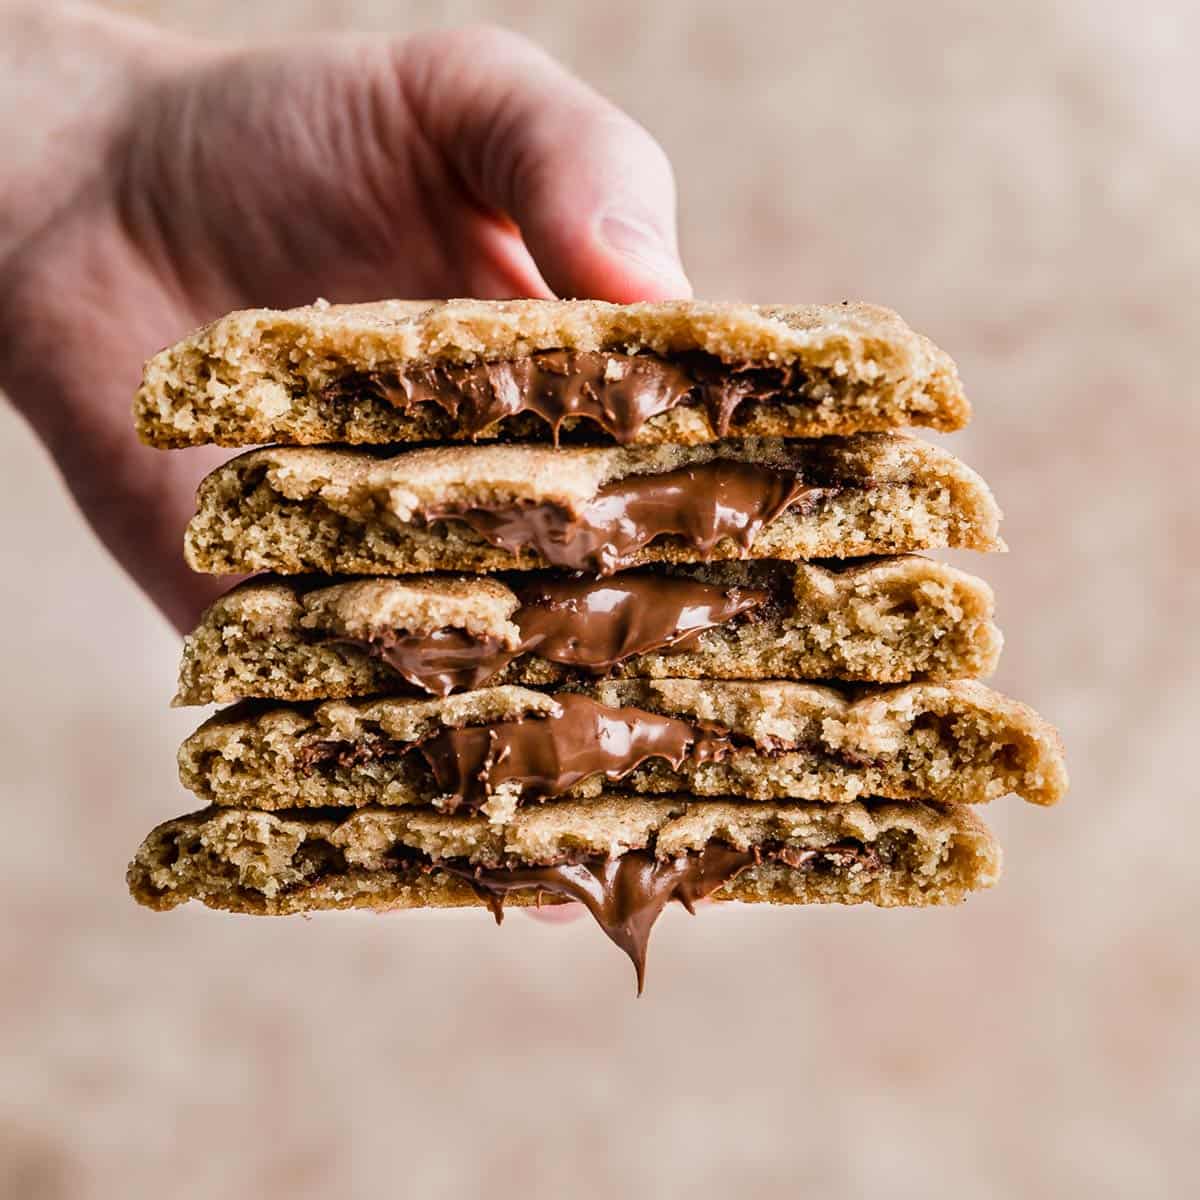 A hand holding a stack of 5 Crumbl Hazelnut Churro Cookies broken in half, against a beige background.